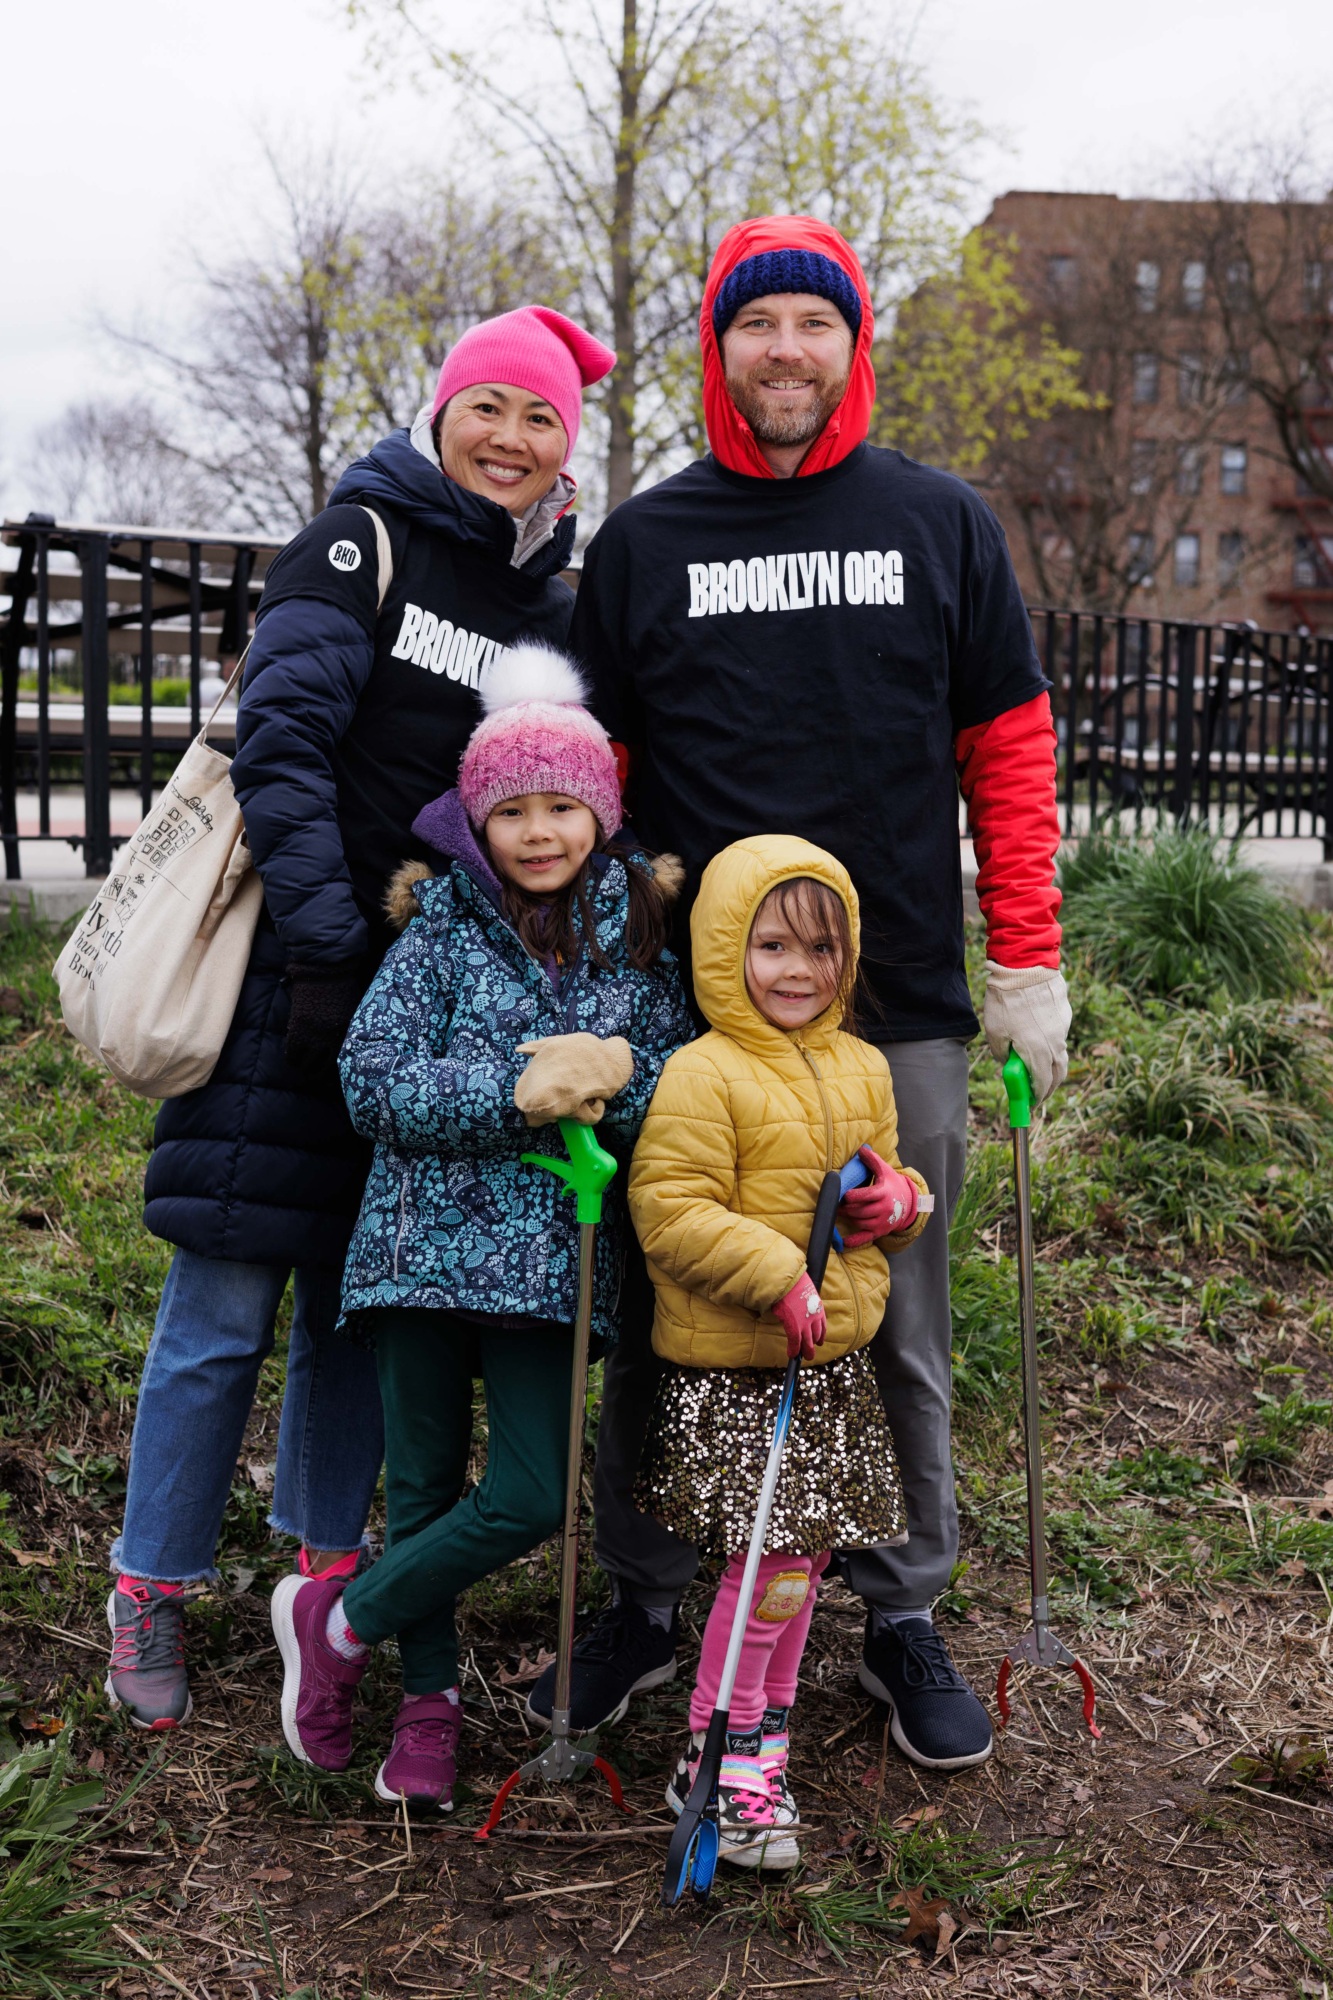 Family of four with gardening tools posing outside, wearing winter hats and smiling at the camera.